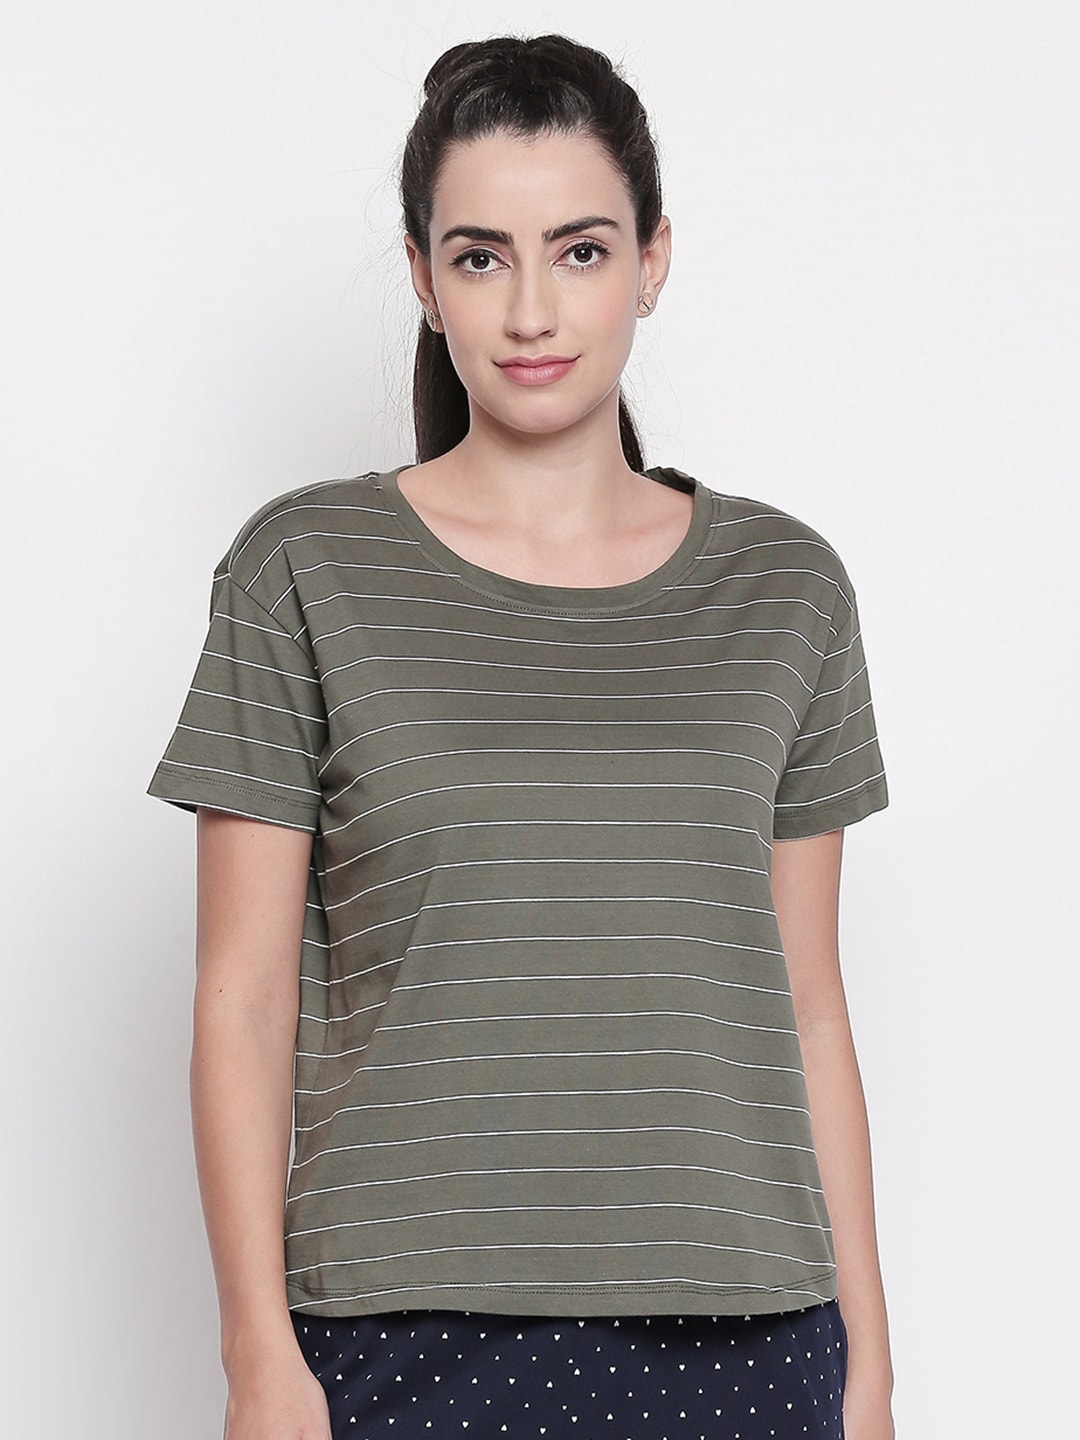 Dreamz by Pantaloons Women Olive Green Striped Lounge tshirt Price in India